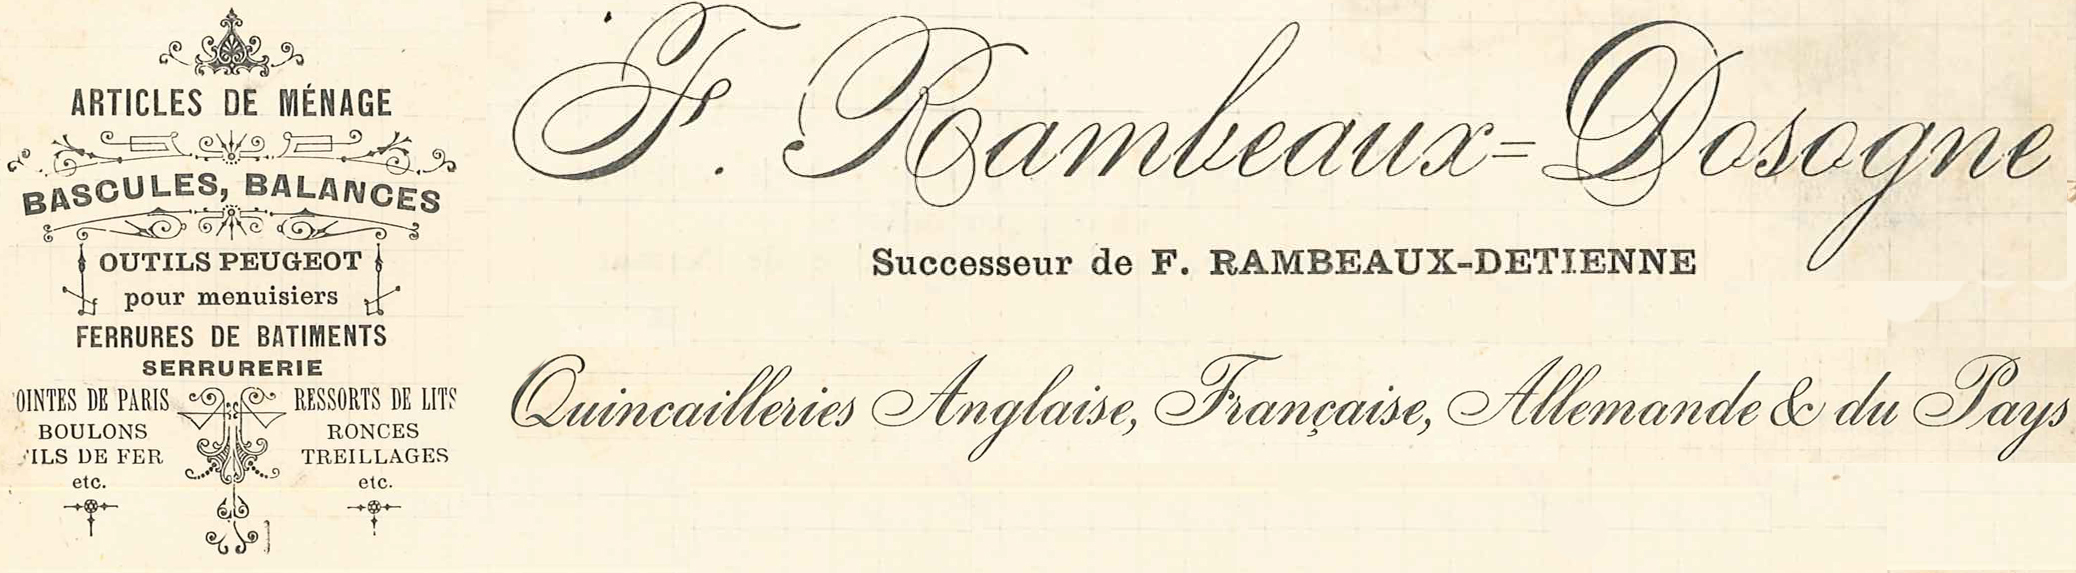 rambeaux dor quincaillerie andenne 1908